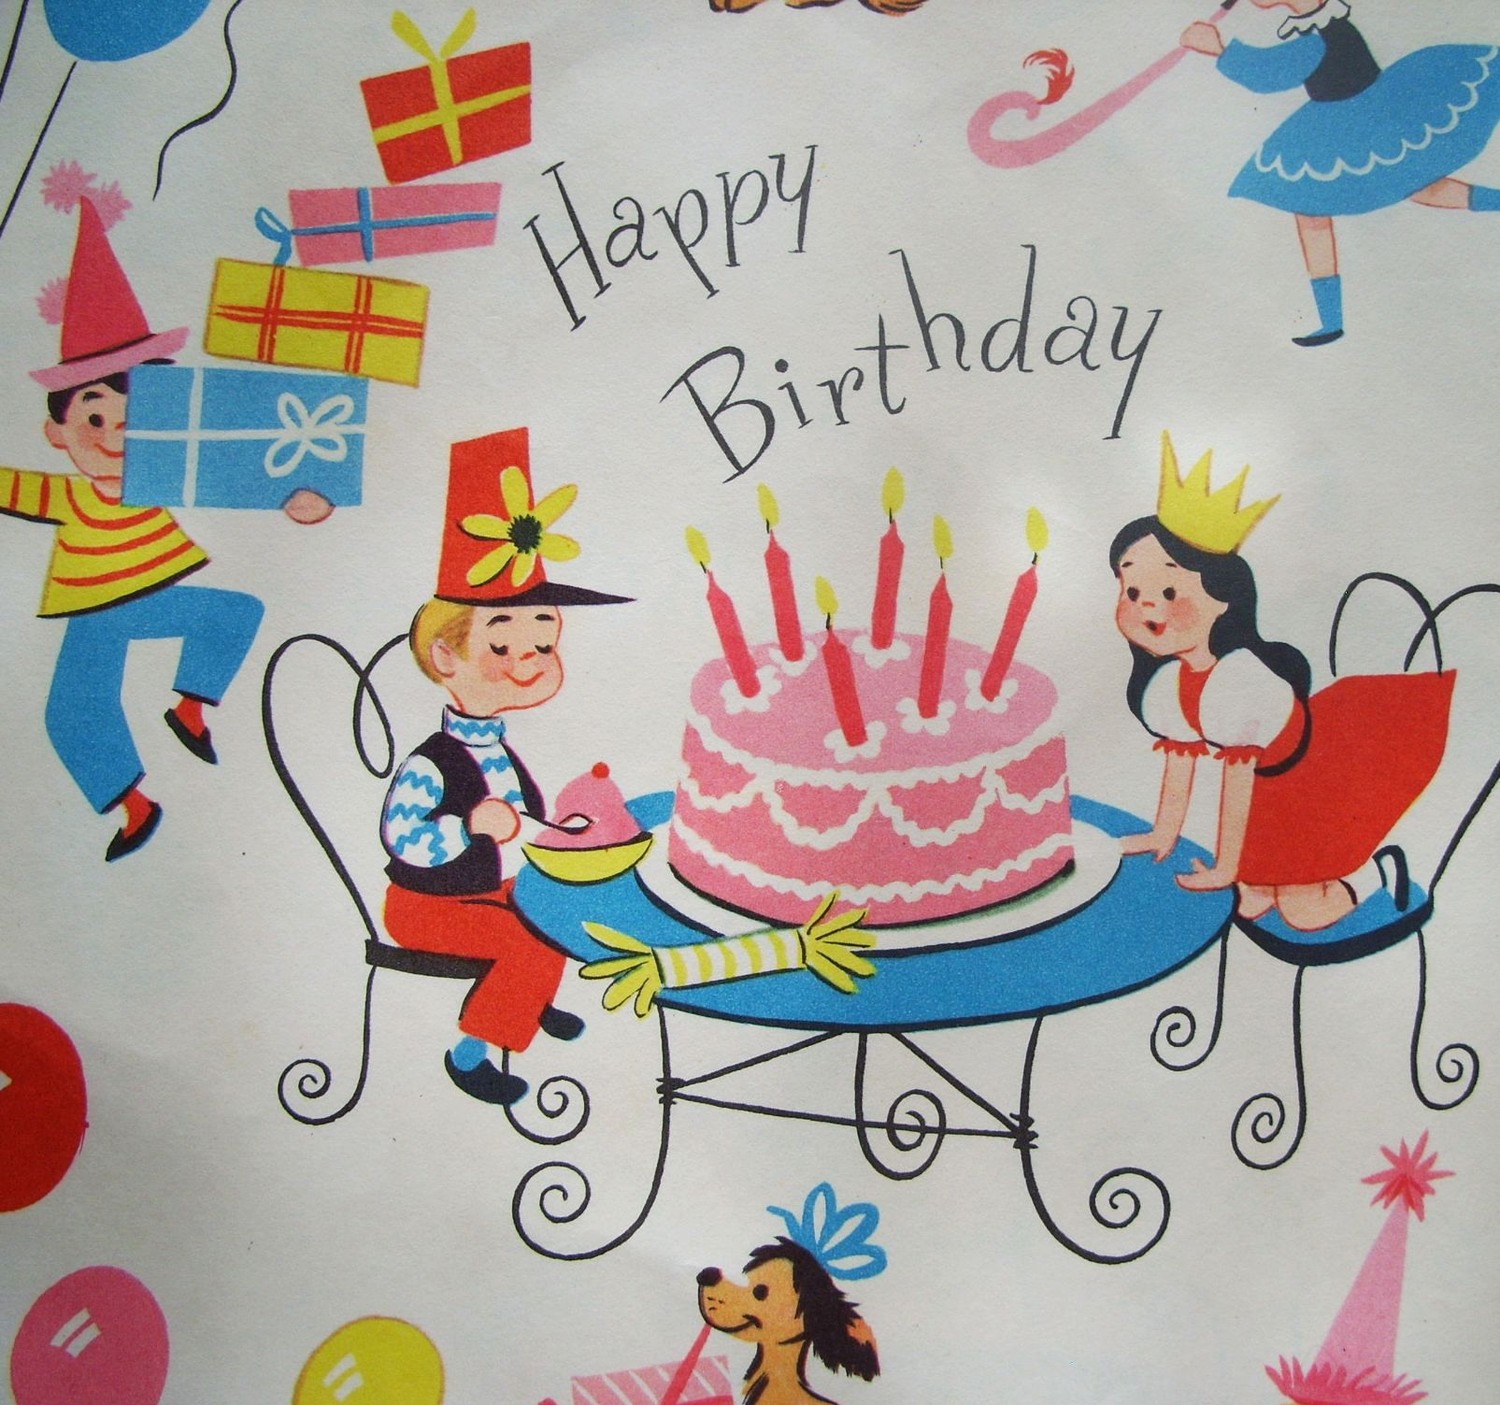 Lovely Birthday Wishes That Can Make Your Niece Happy on Her Birthday 1